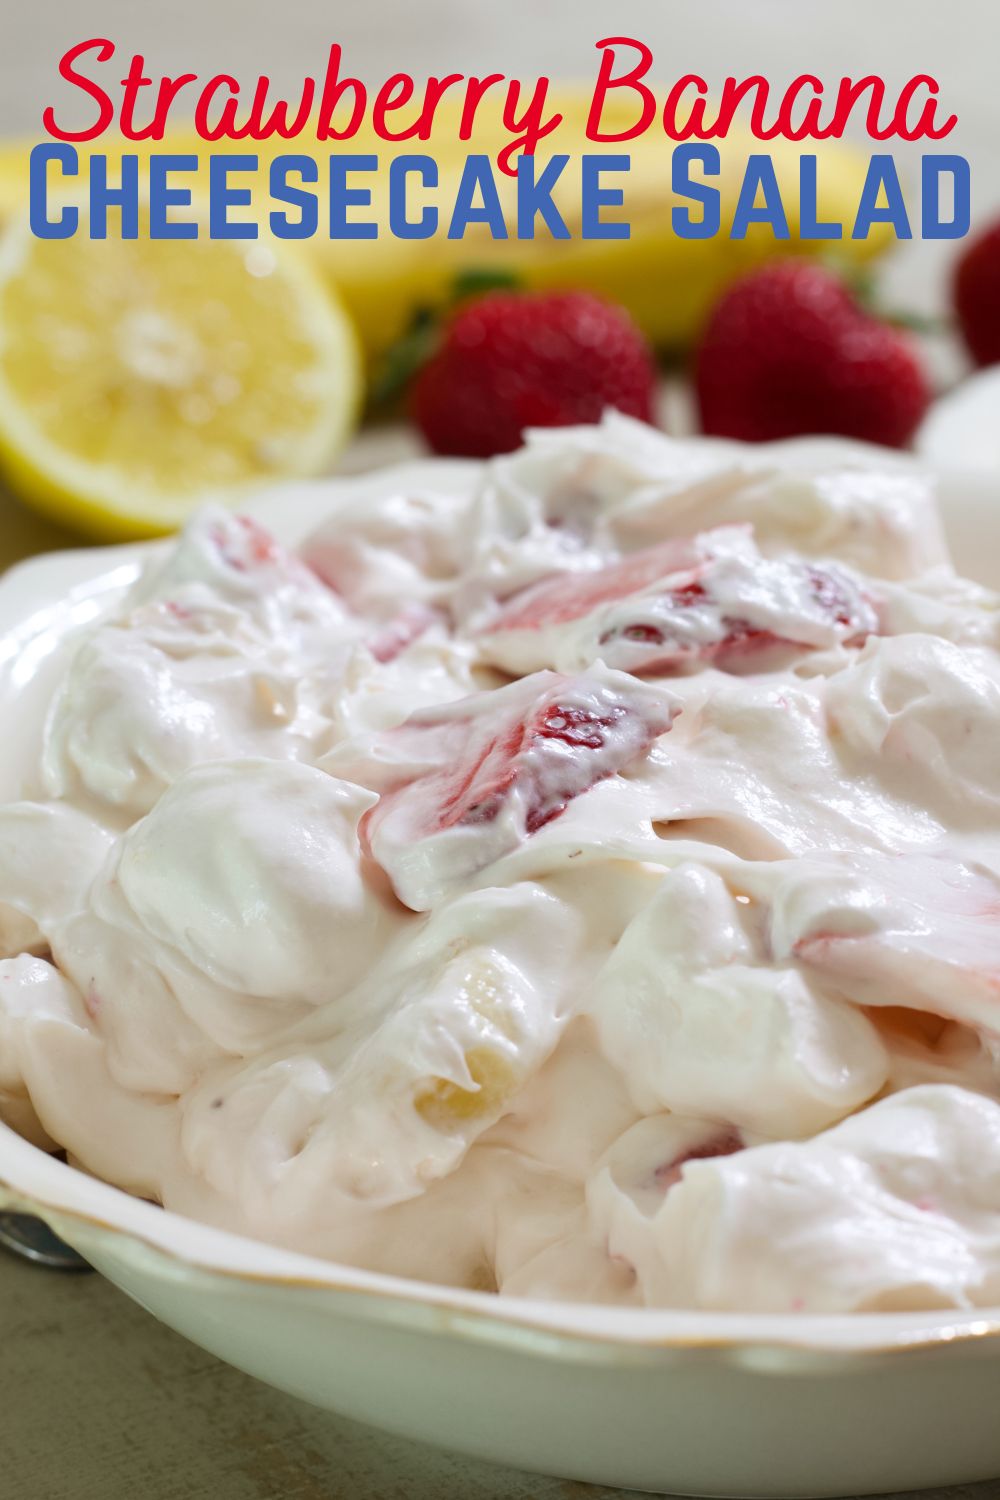 Close up side view of a bowl of Strawberry banana cheesecake salad.